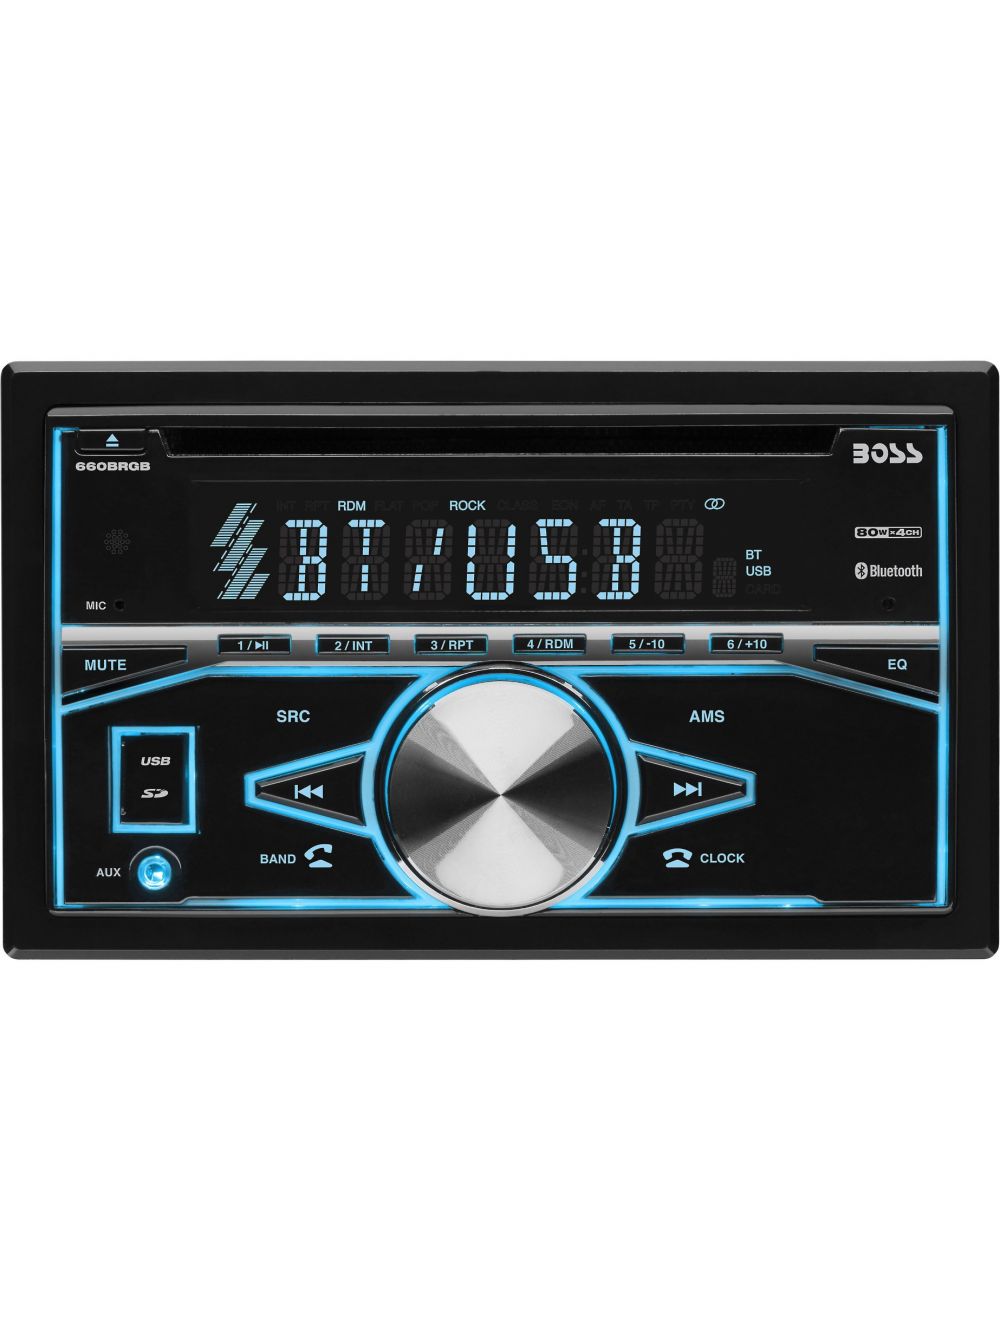 Boss 660BRGB Double Din Bluetooth Car Stereo CD receiver